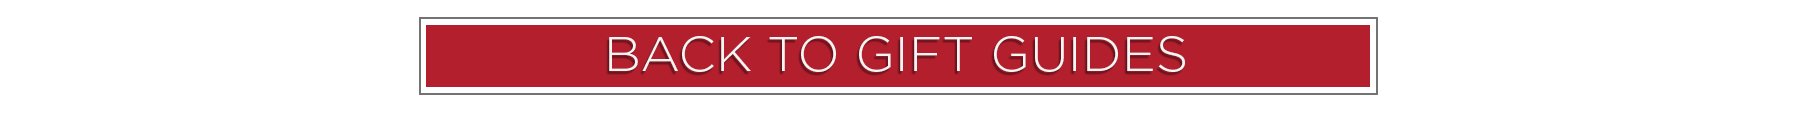 Back to Gift Guides, Click Here